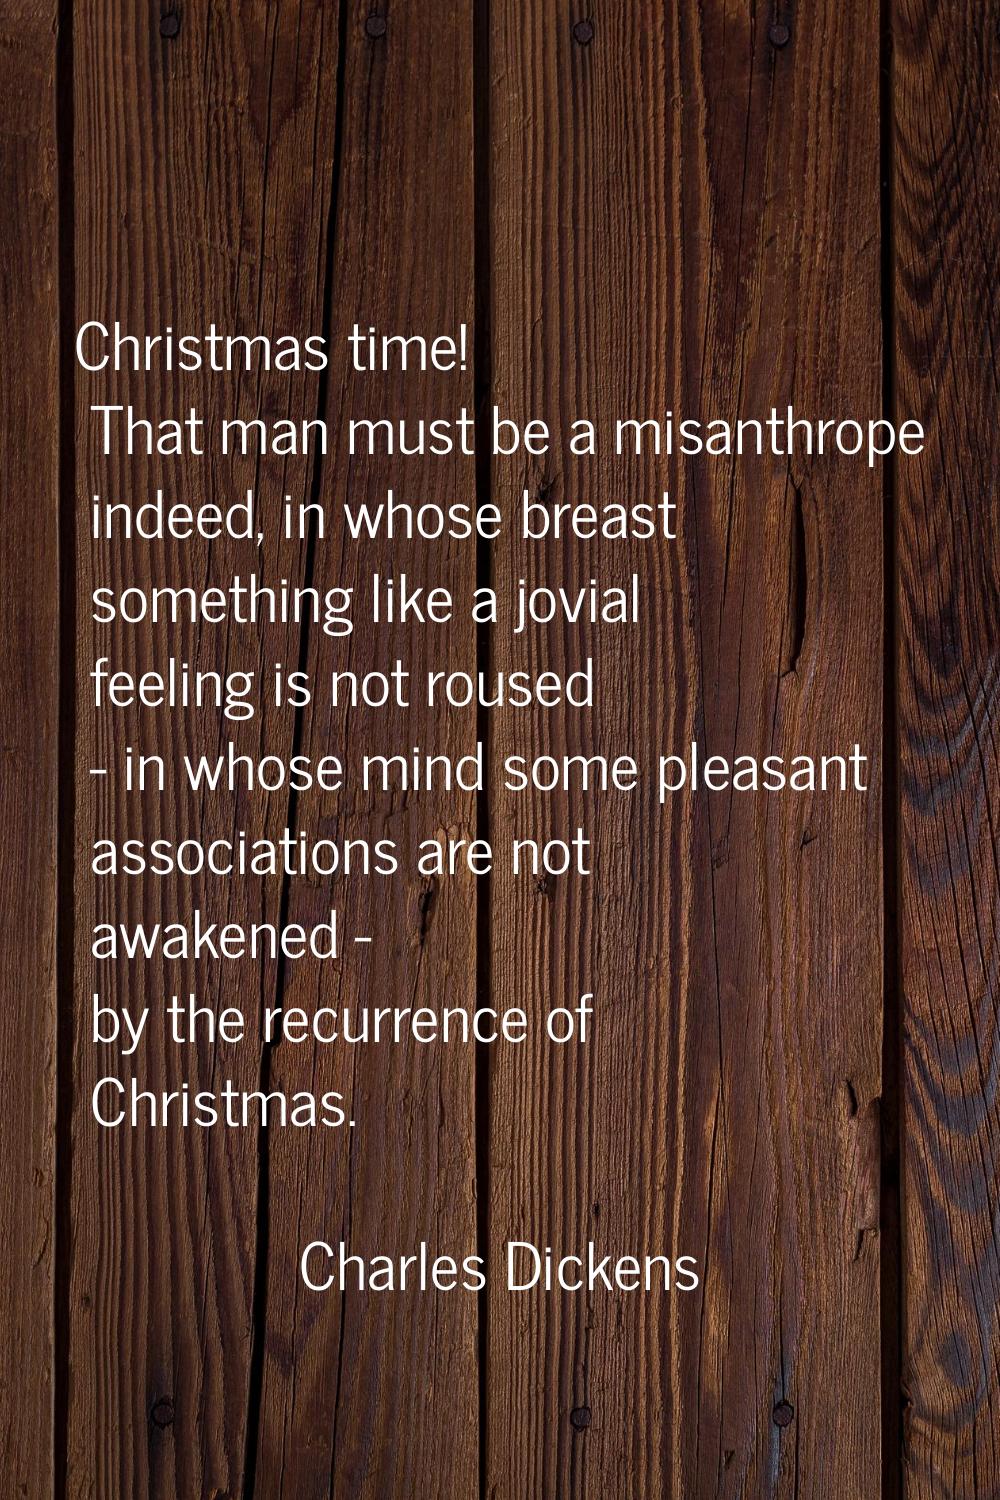 Christmas time! That man must be a misanthrope indeed, in whose breast something like a jovial feel